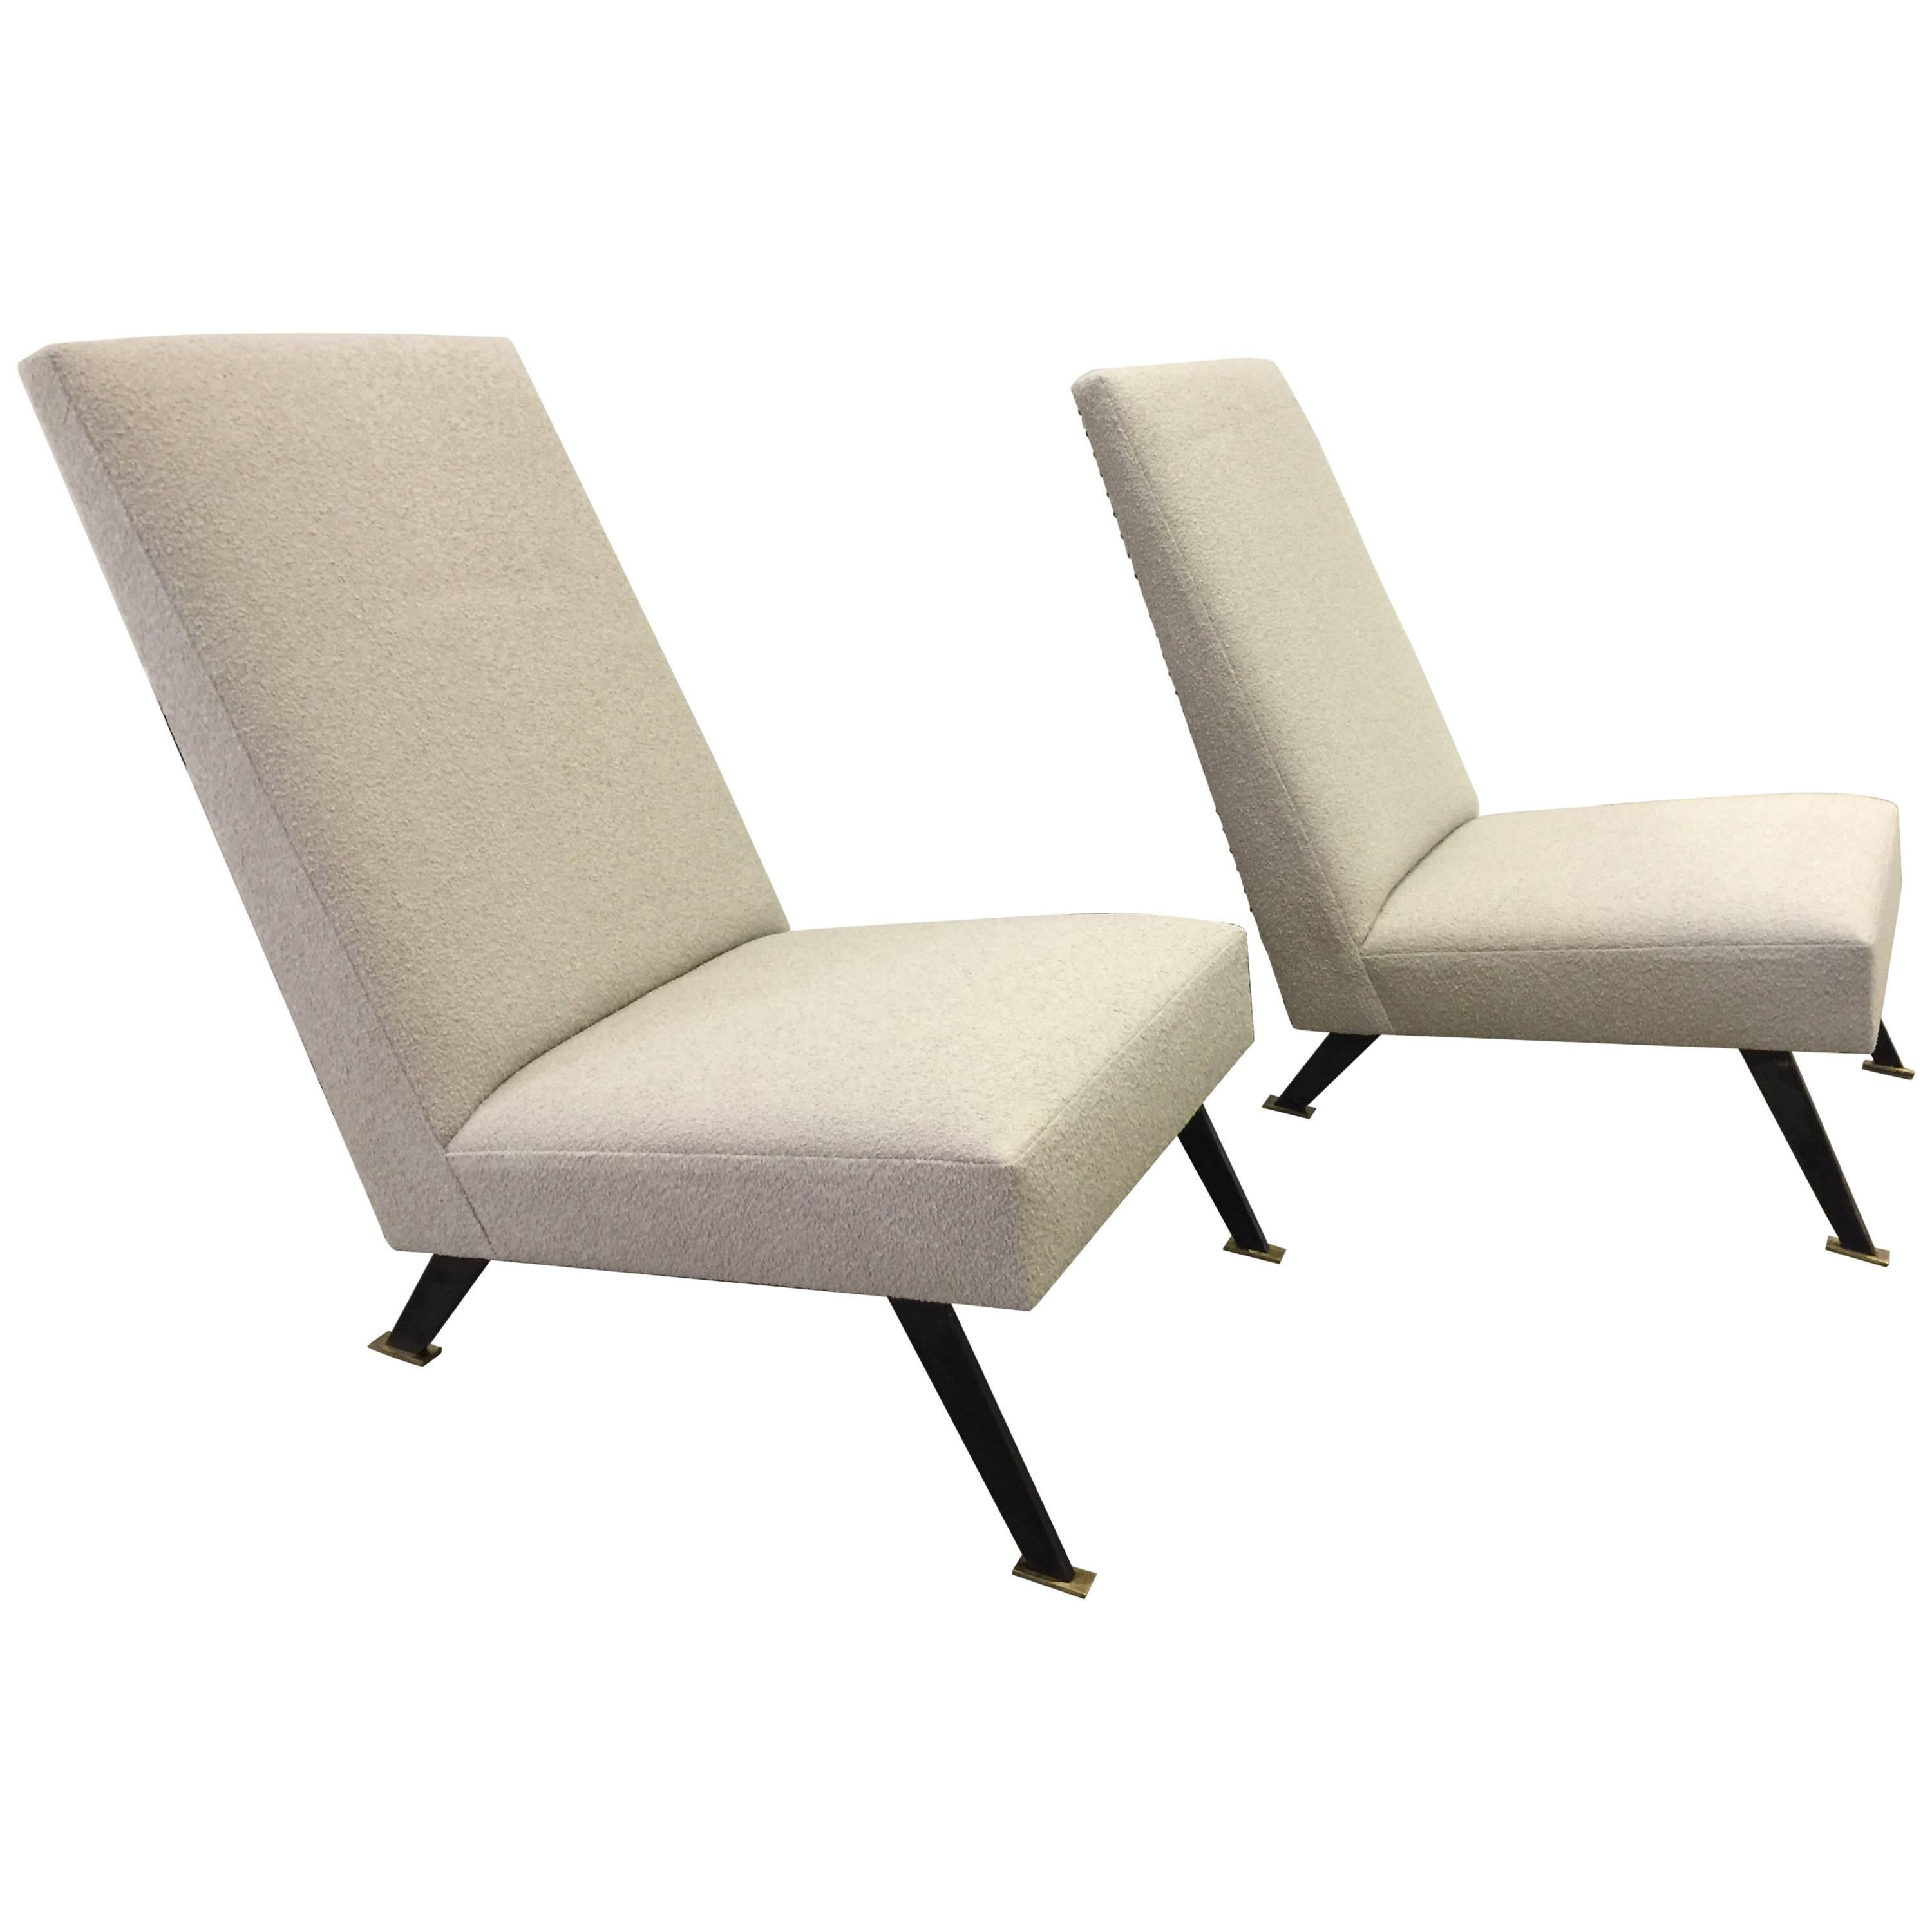 Pair of French Sleek Lounge Chairs